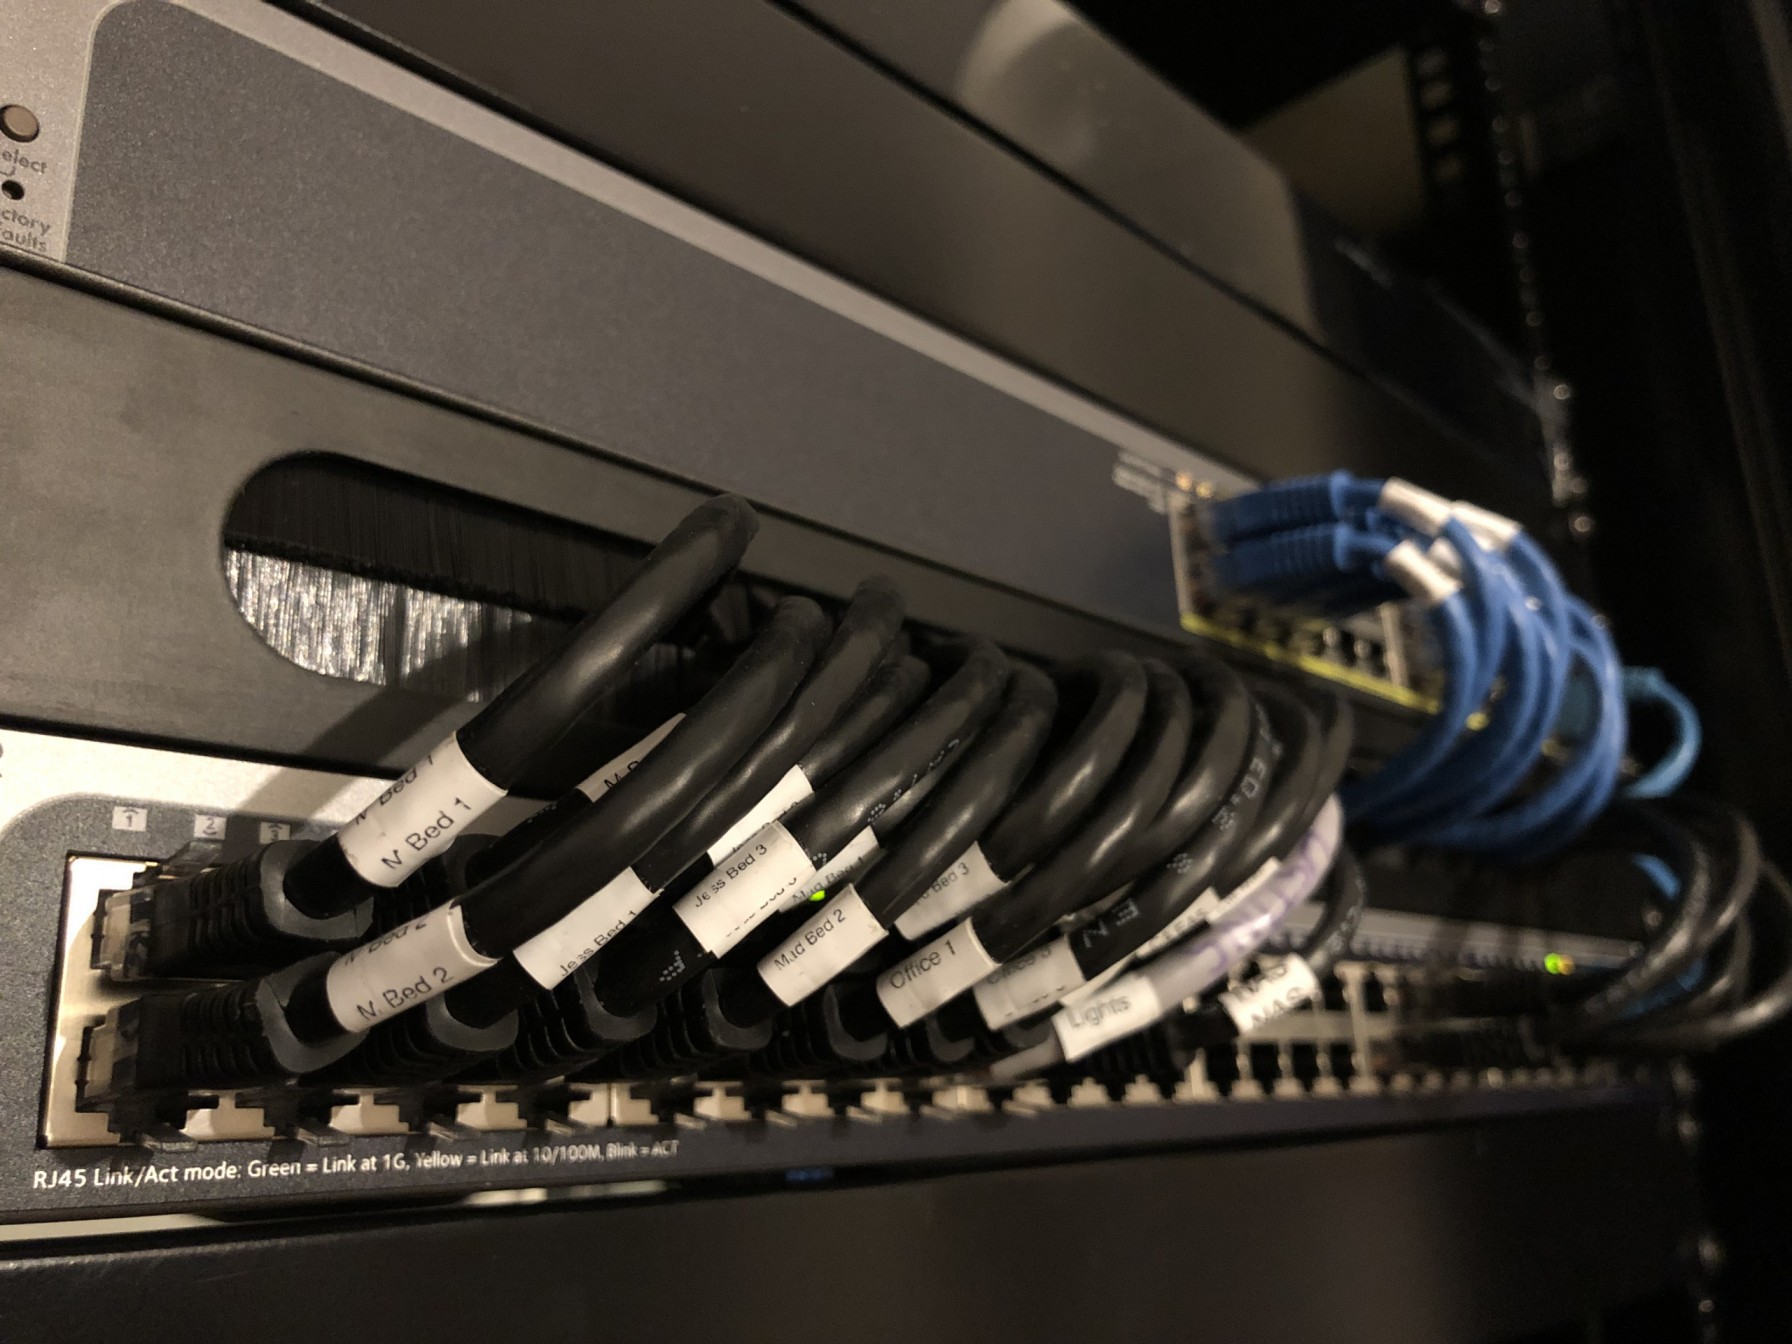 AV rack with ethernet cables plugged into a switch